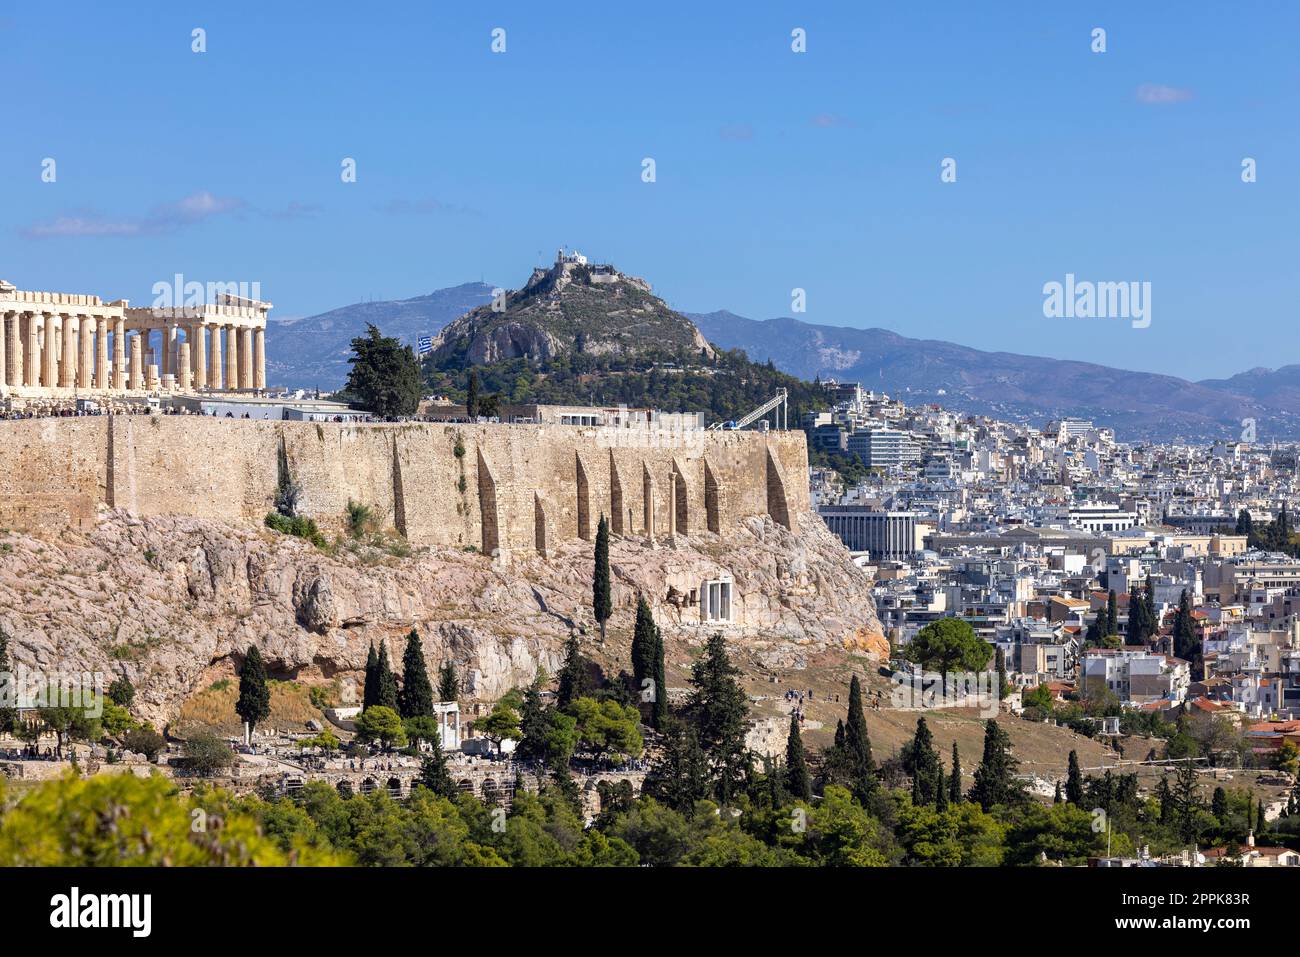 View of the Acropolis of Athens from Muse Hill. Aerial view of the city in the distance and Mount Lycabettus, Athens, Greece Stock Photo